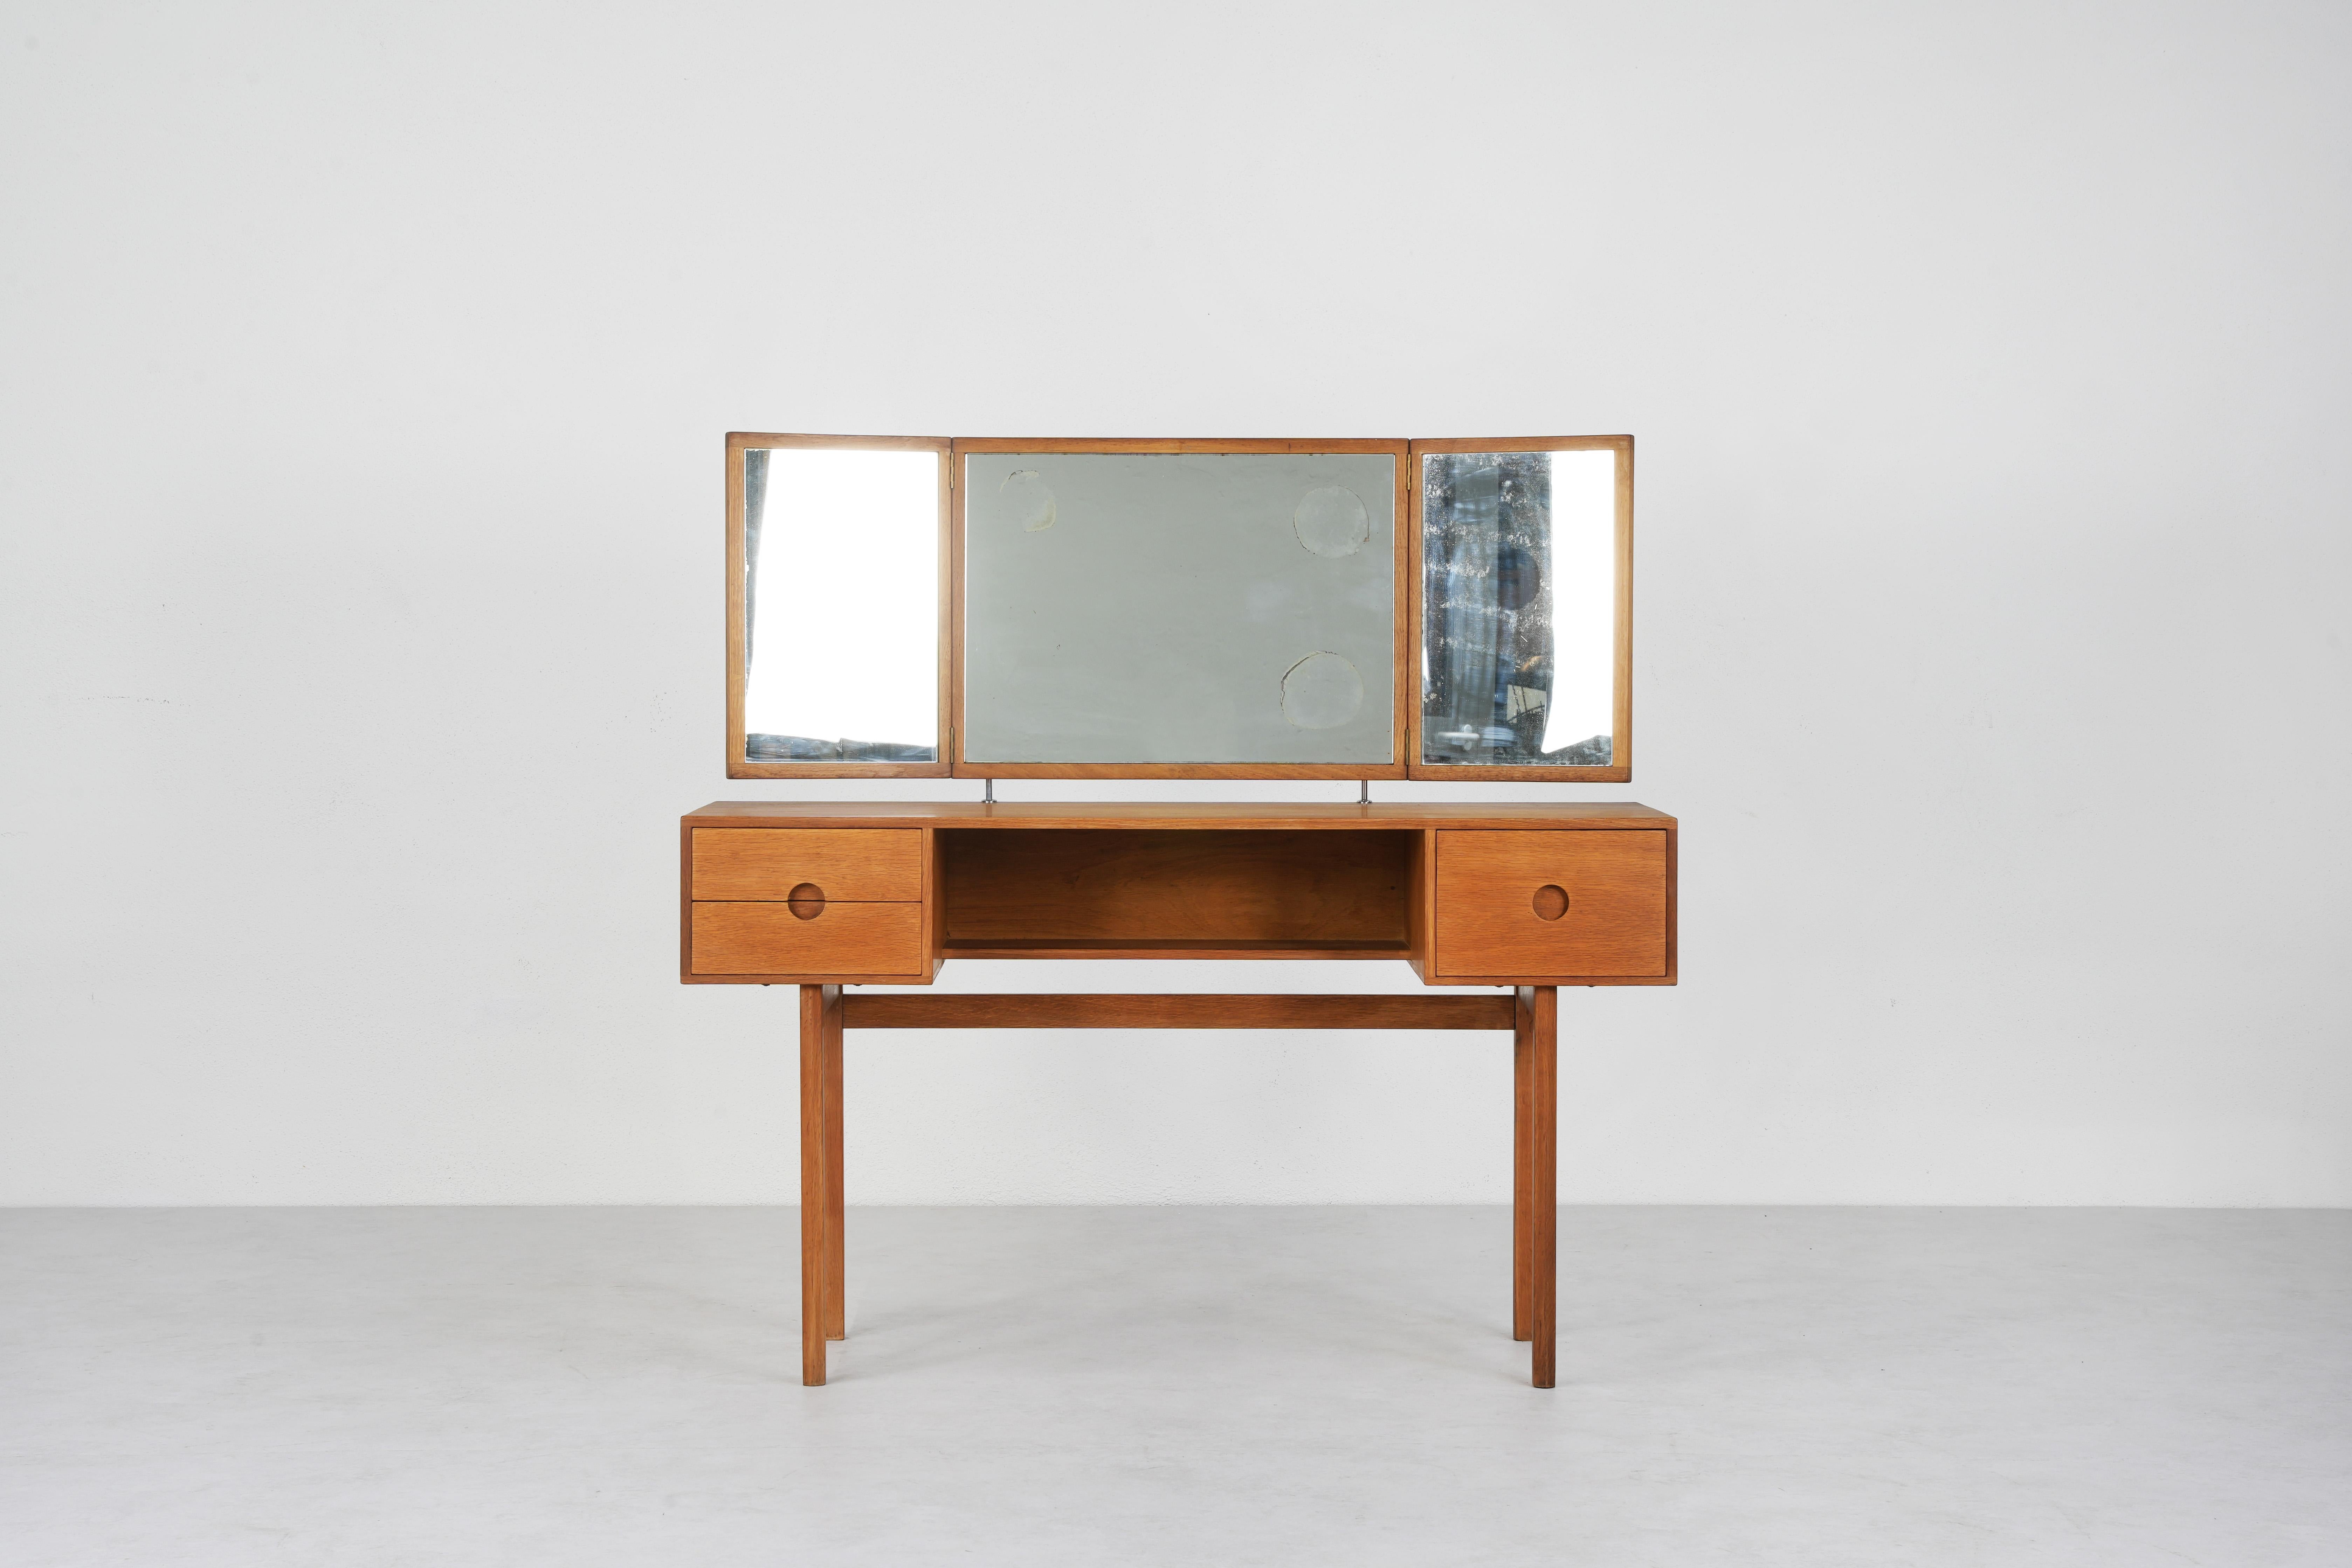 Designed by Kai Kristiansen for Aksel Kjersgaard in the mid-1960s, model 40. Solid oak drawer fronts with striking round recessed pulls. 
The mirror angle adjusts by sliding the oak cubes up and down the mounting posts (in the back).
Great condition